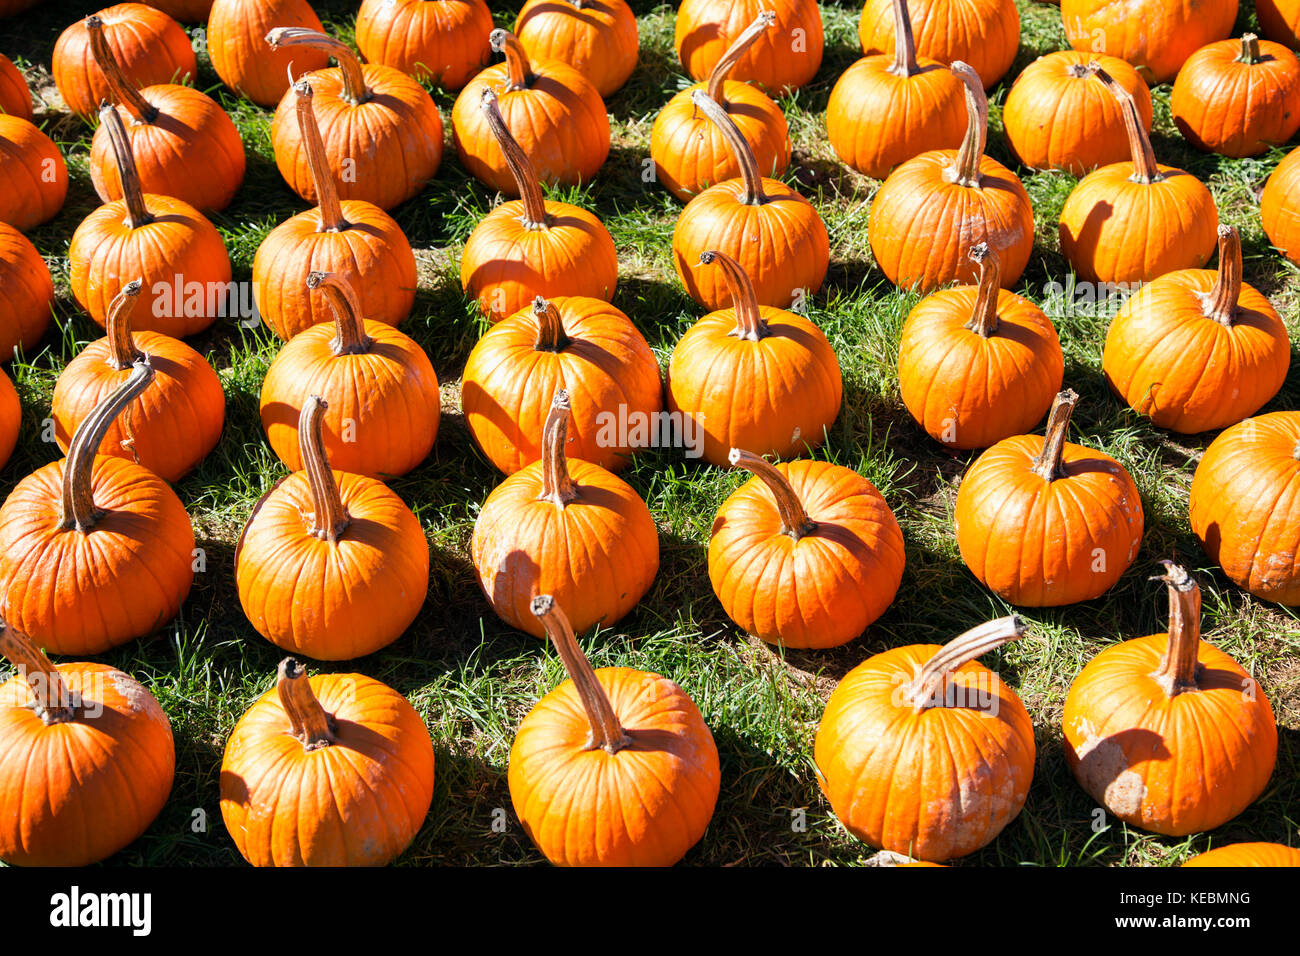 Rows of pumpkins ready for harvest at a pumpkin patch farm in New York State Stock Photo